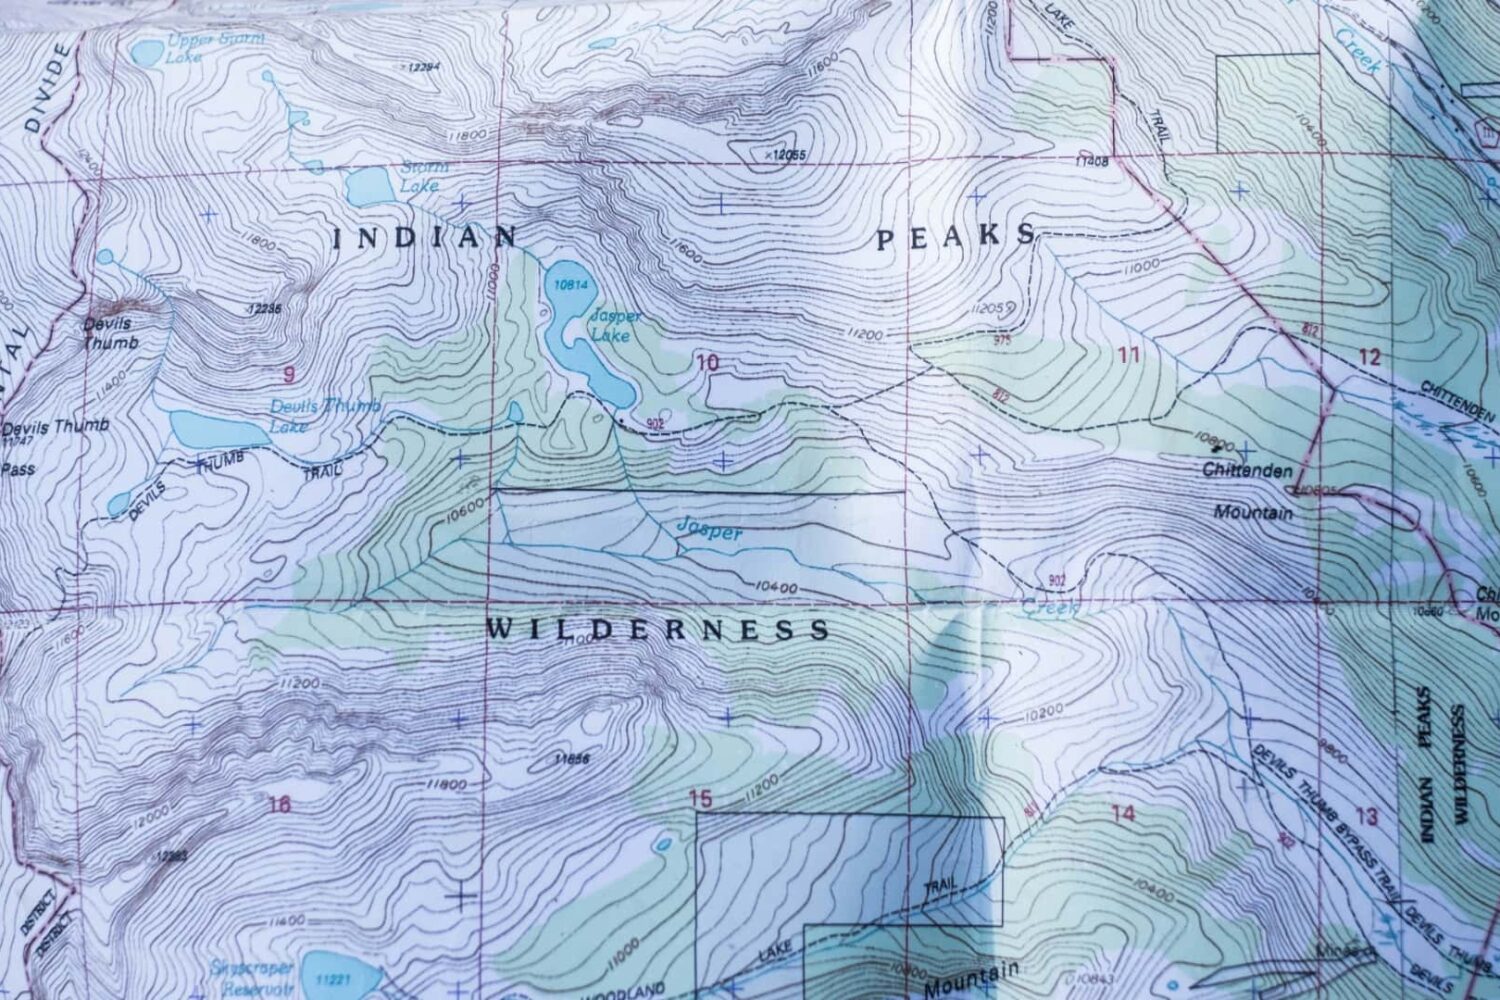 Topographic map of Colorado on paper showcasing contours, hiking trails, hill shades and other natural and man-made terrain features